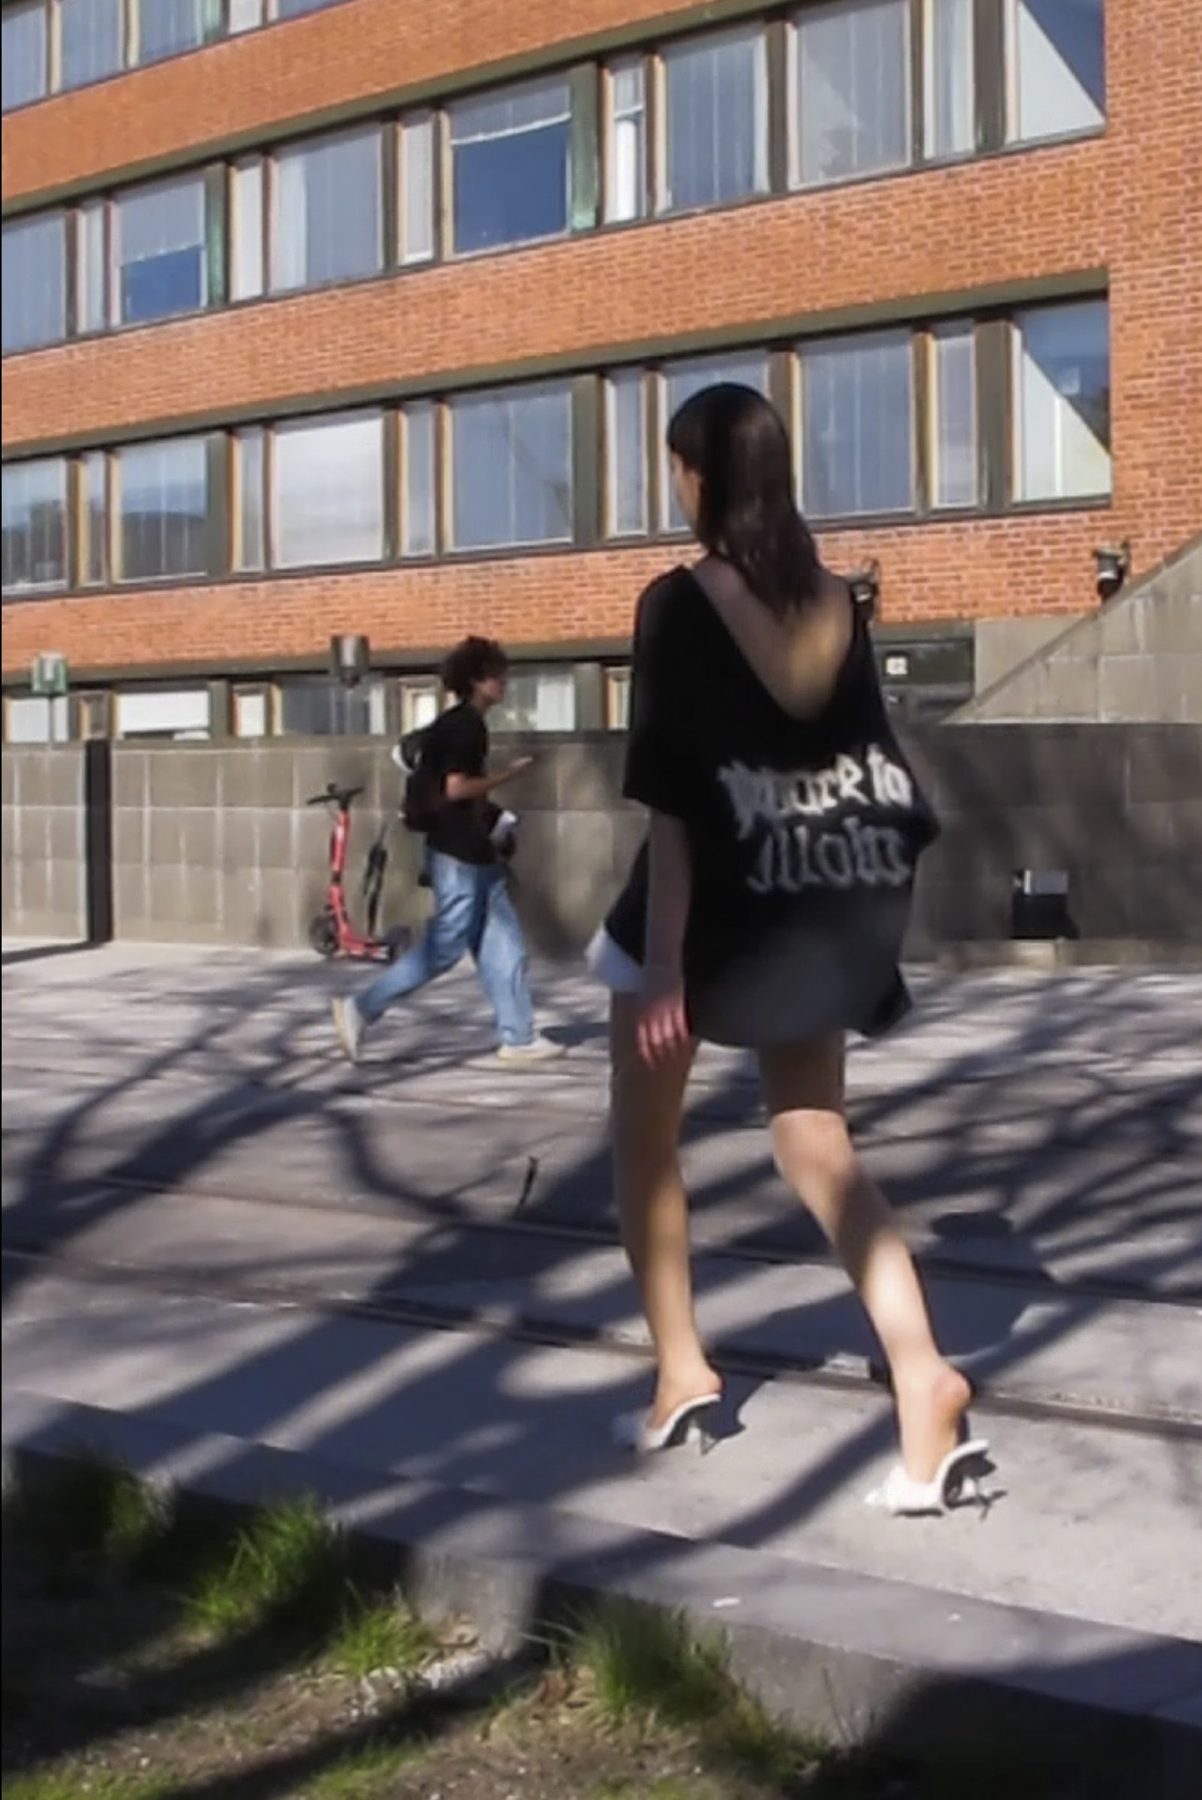 Model is walking and wearing a black t-shirt with text and short white skirt